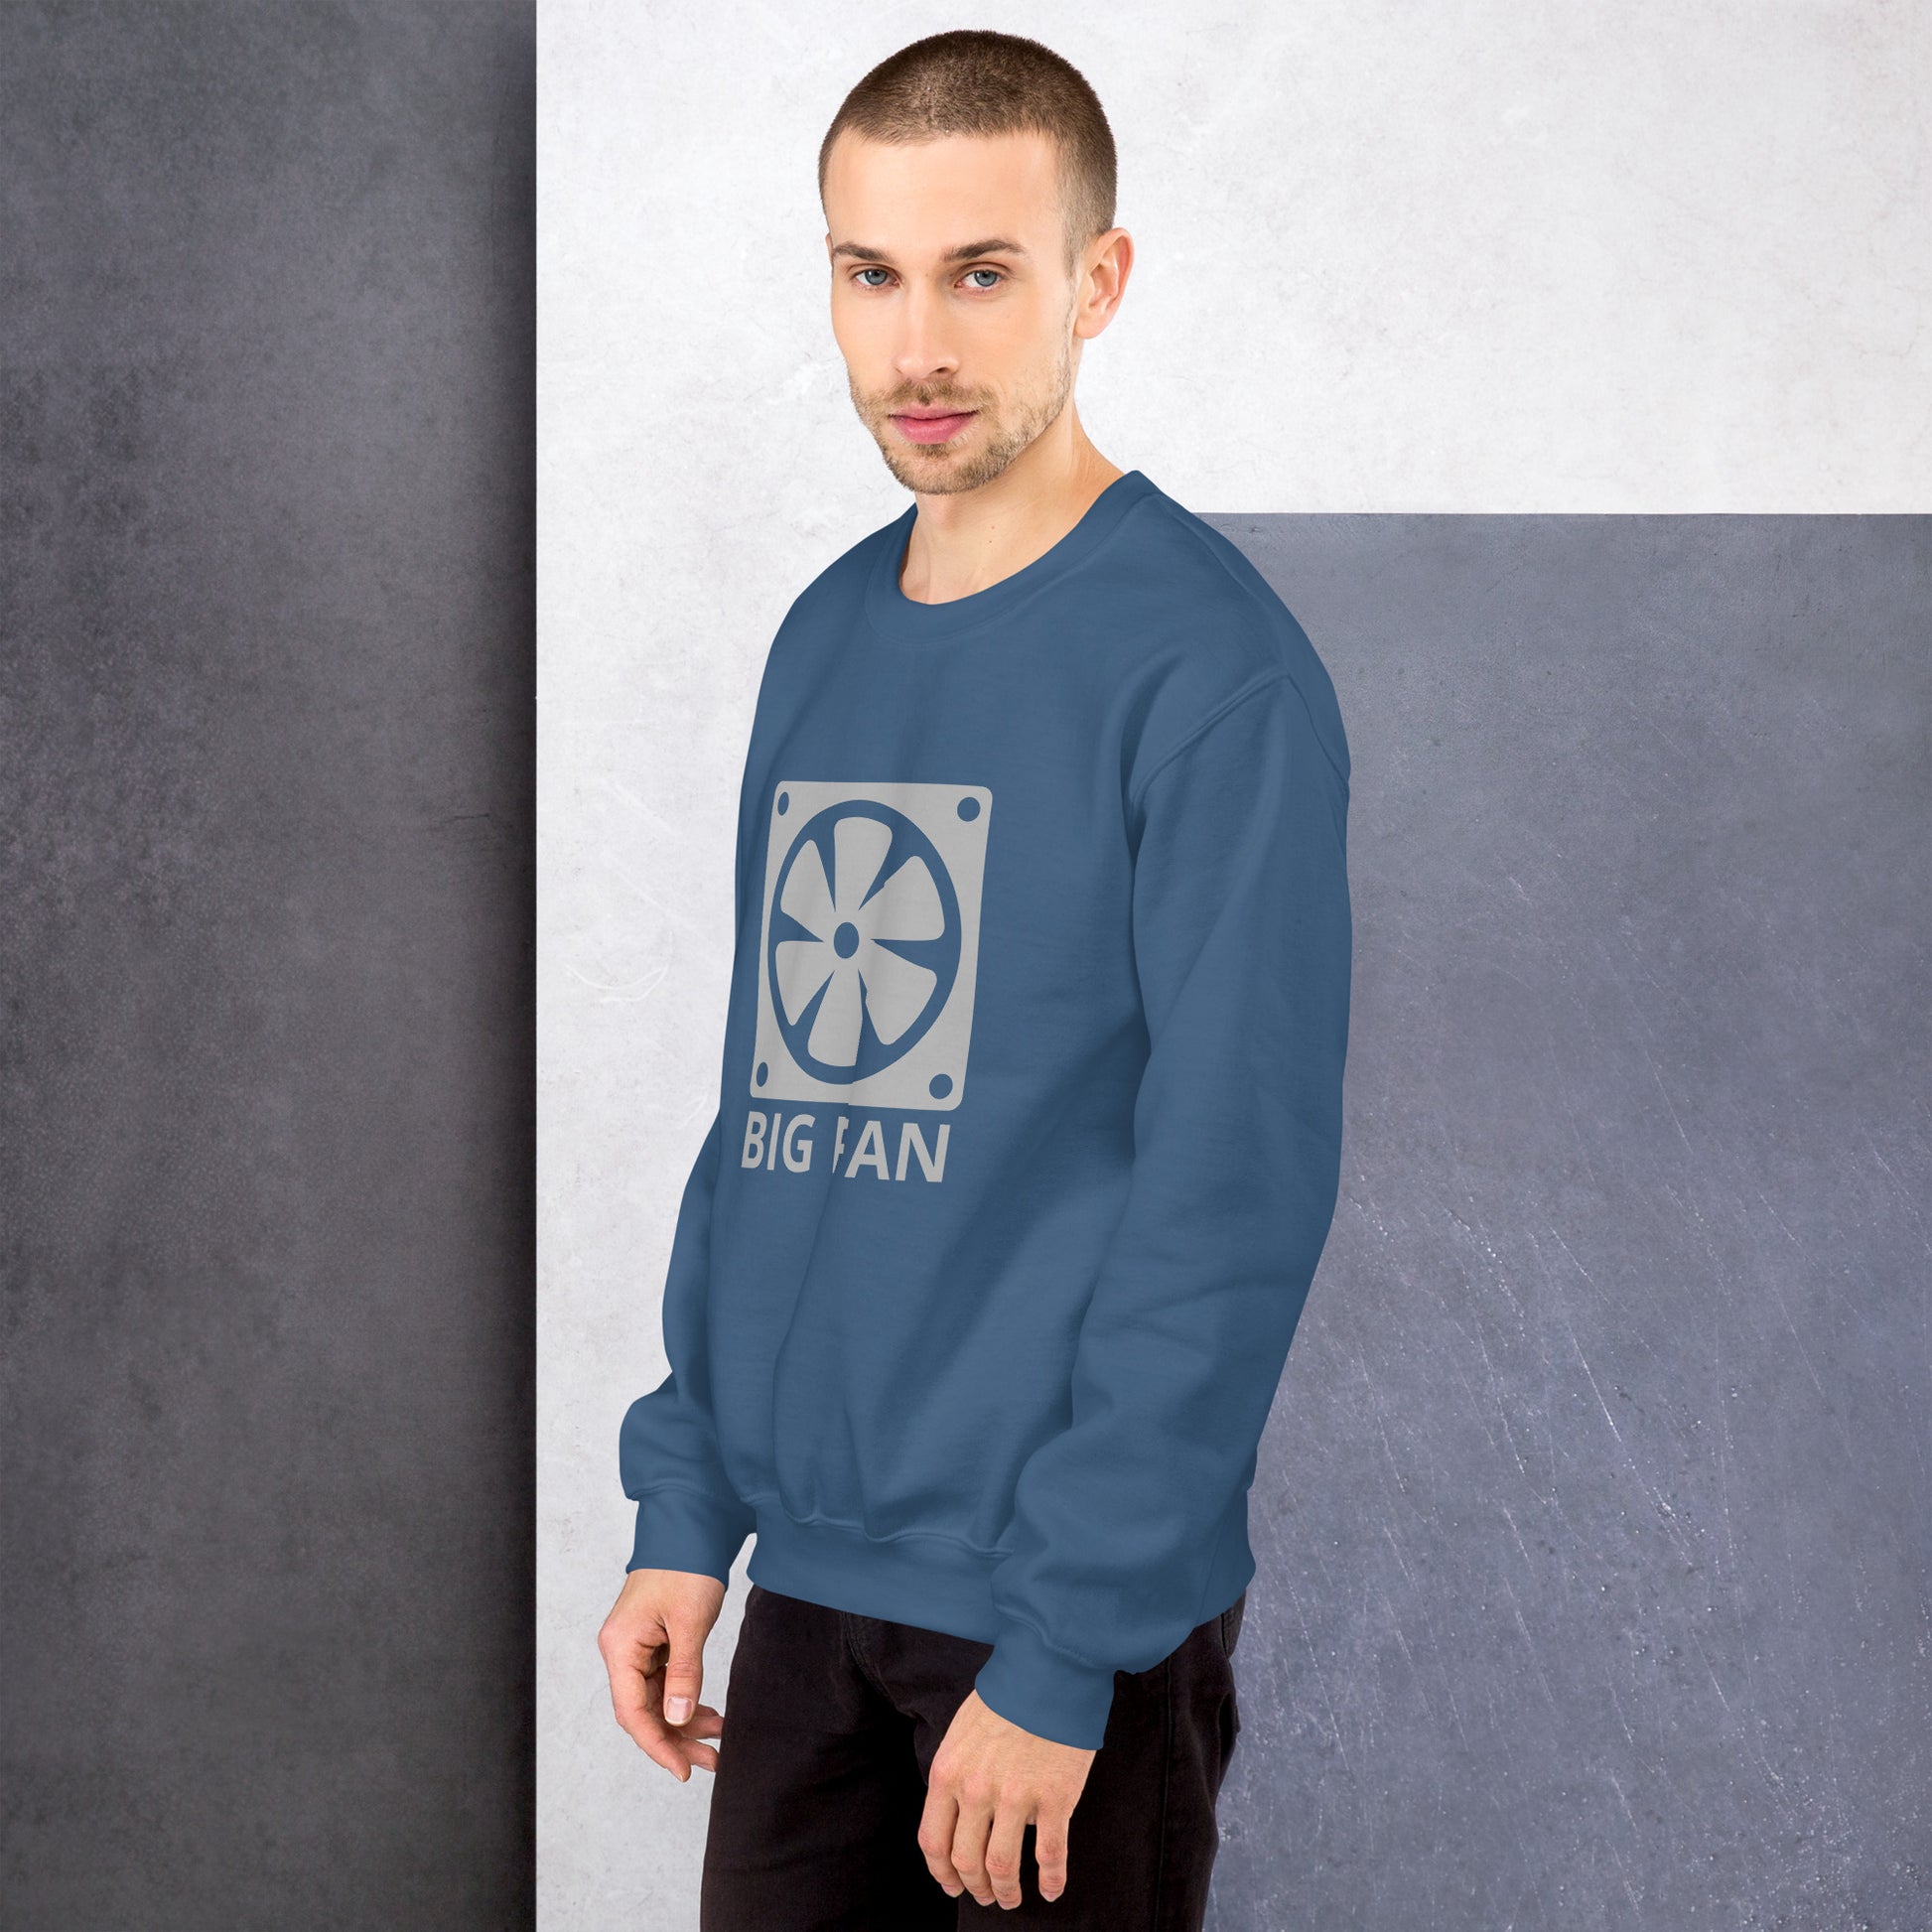 Men with indigo blue sweatshirt with image of a big computer fan and the text "BIG FAN"